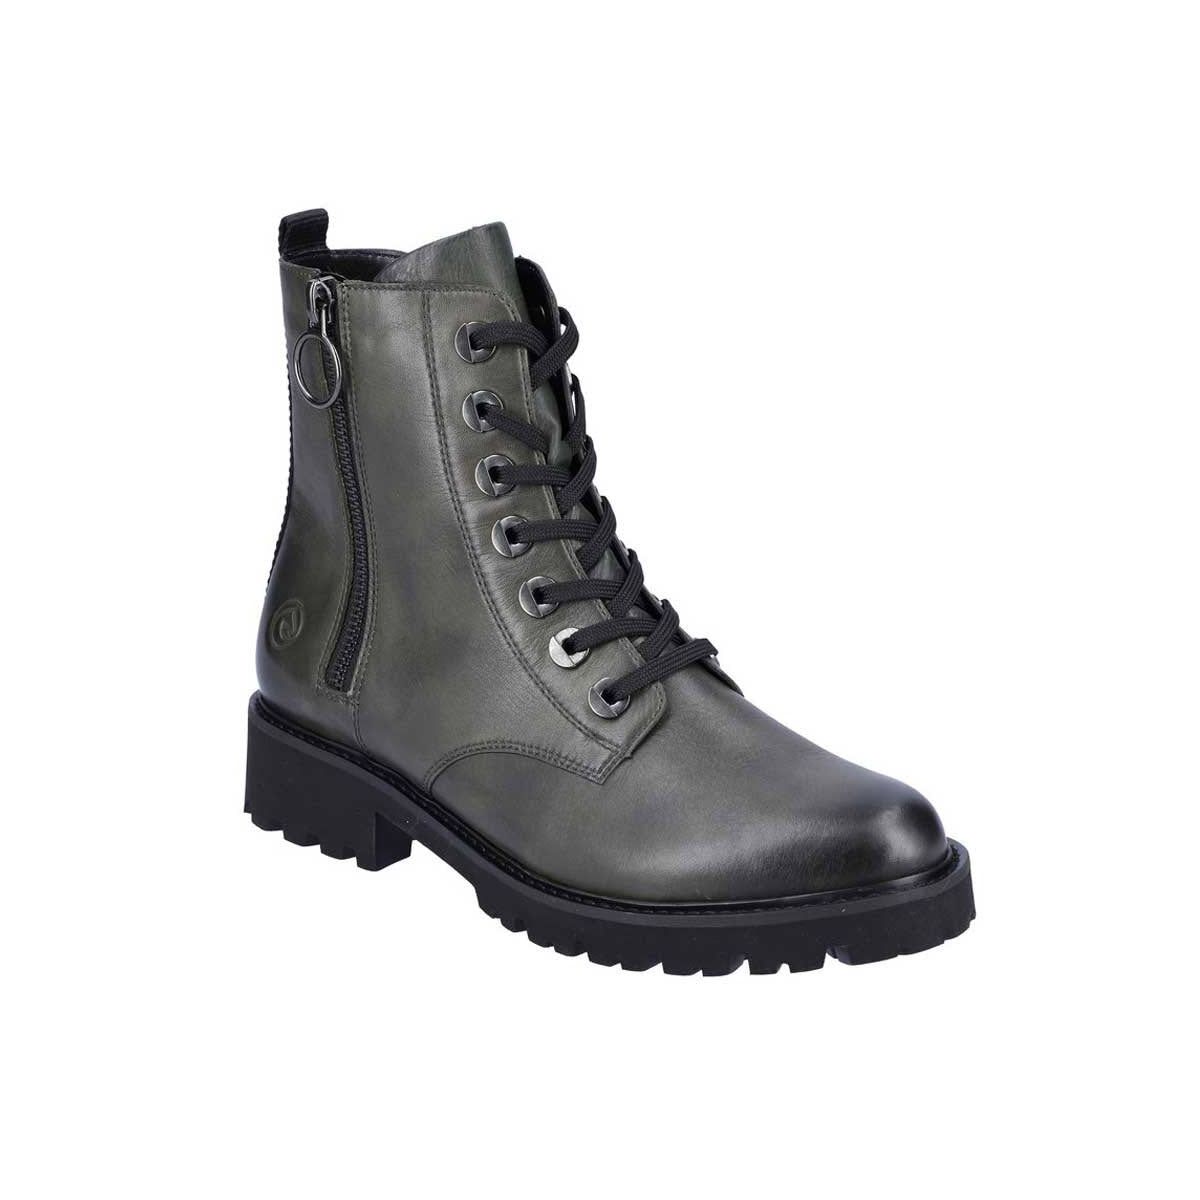 Remonte forest green faux-leather combat bootie with a side zipper on a white background.